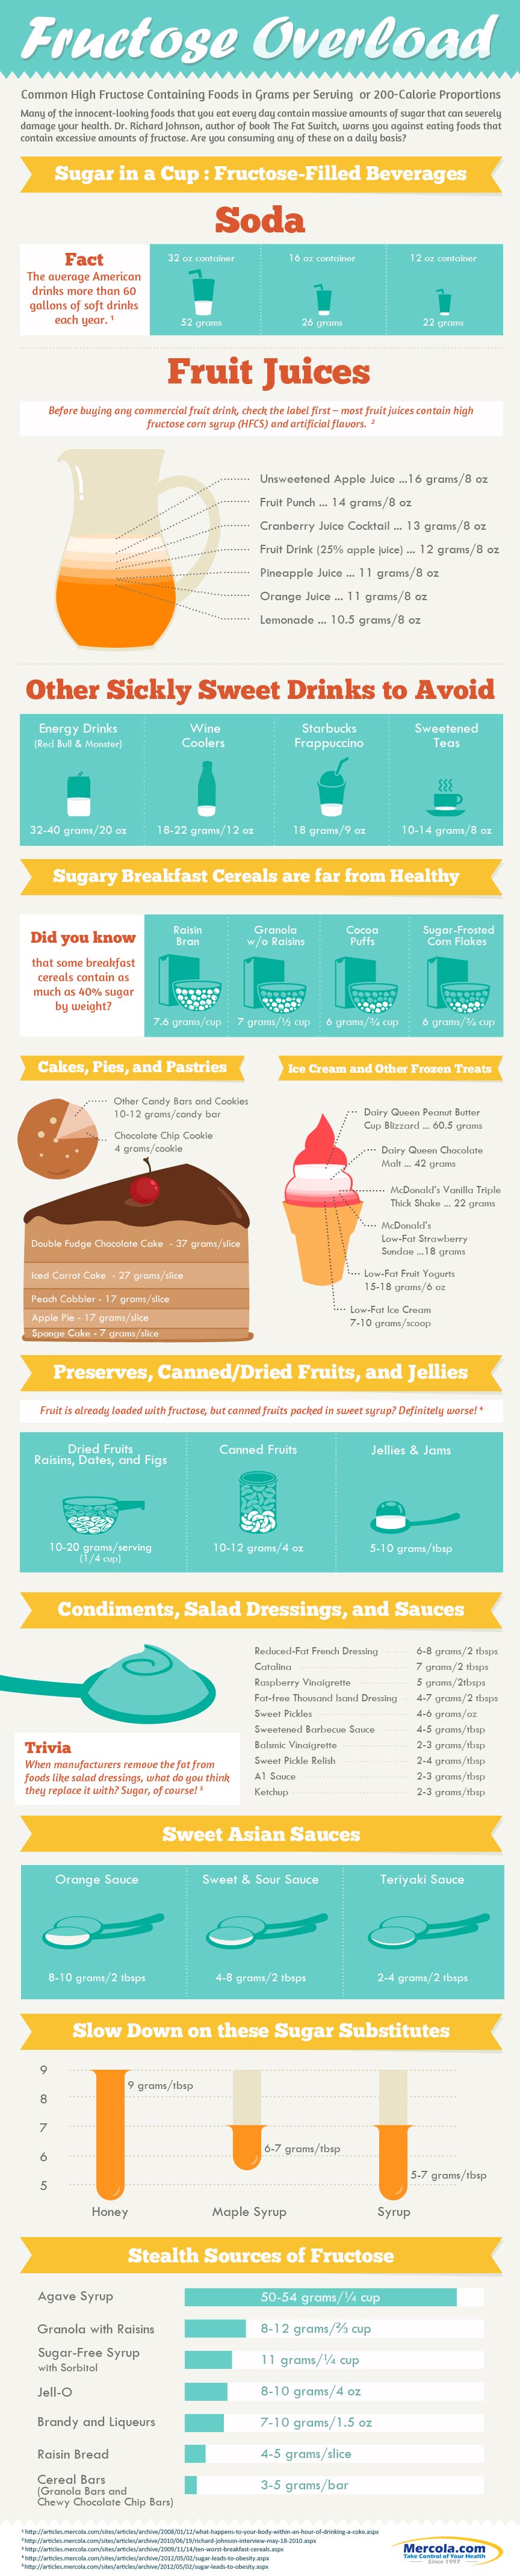 fructose overload infographic